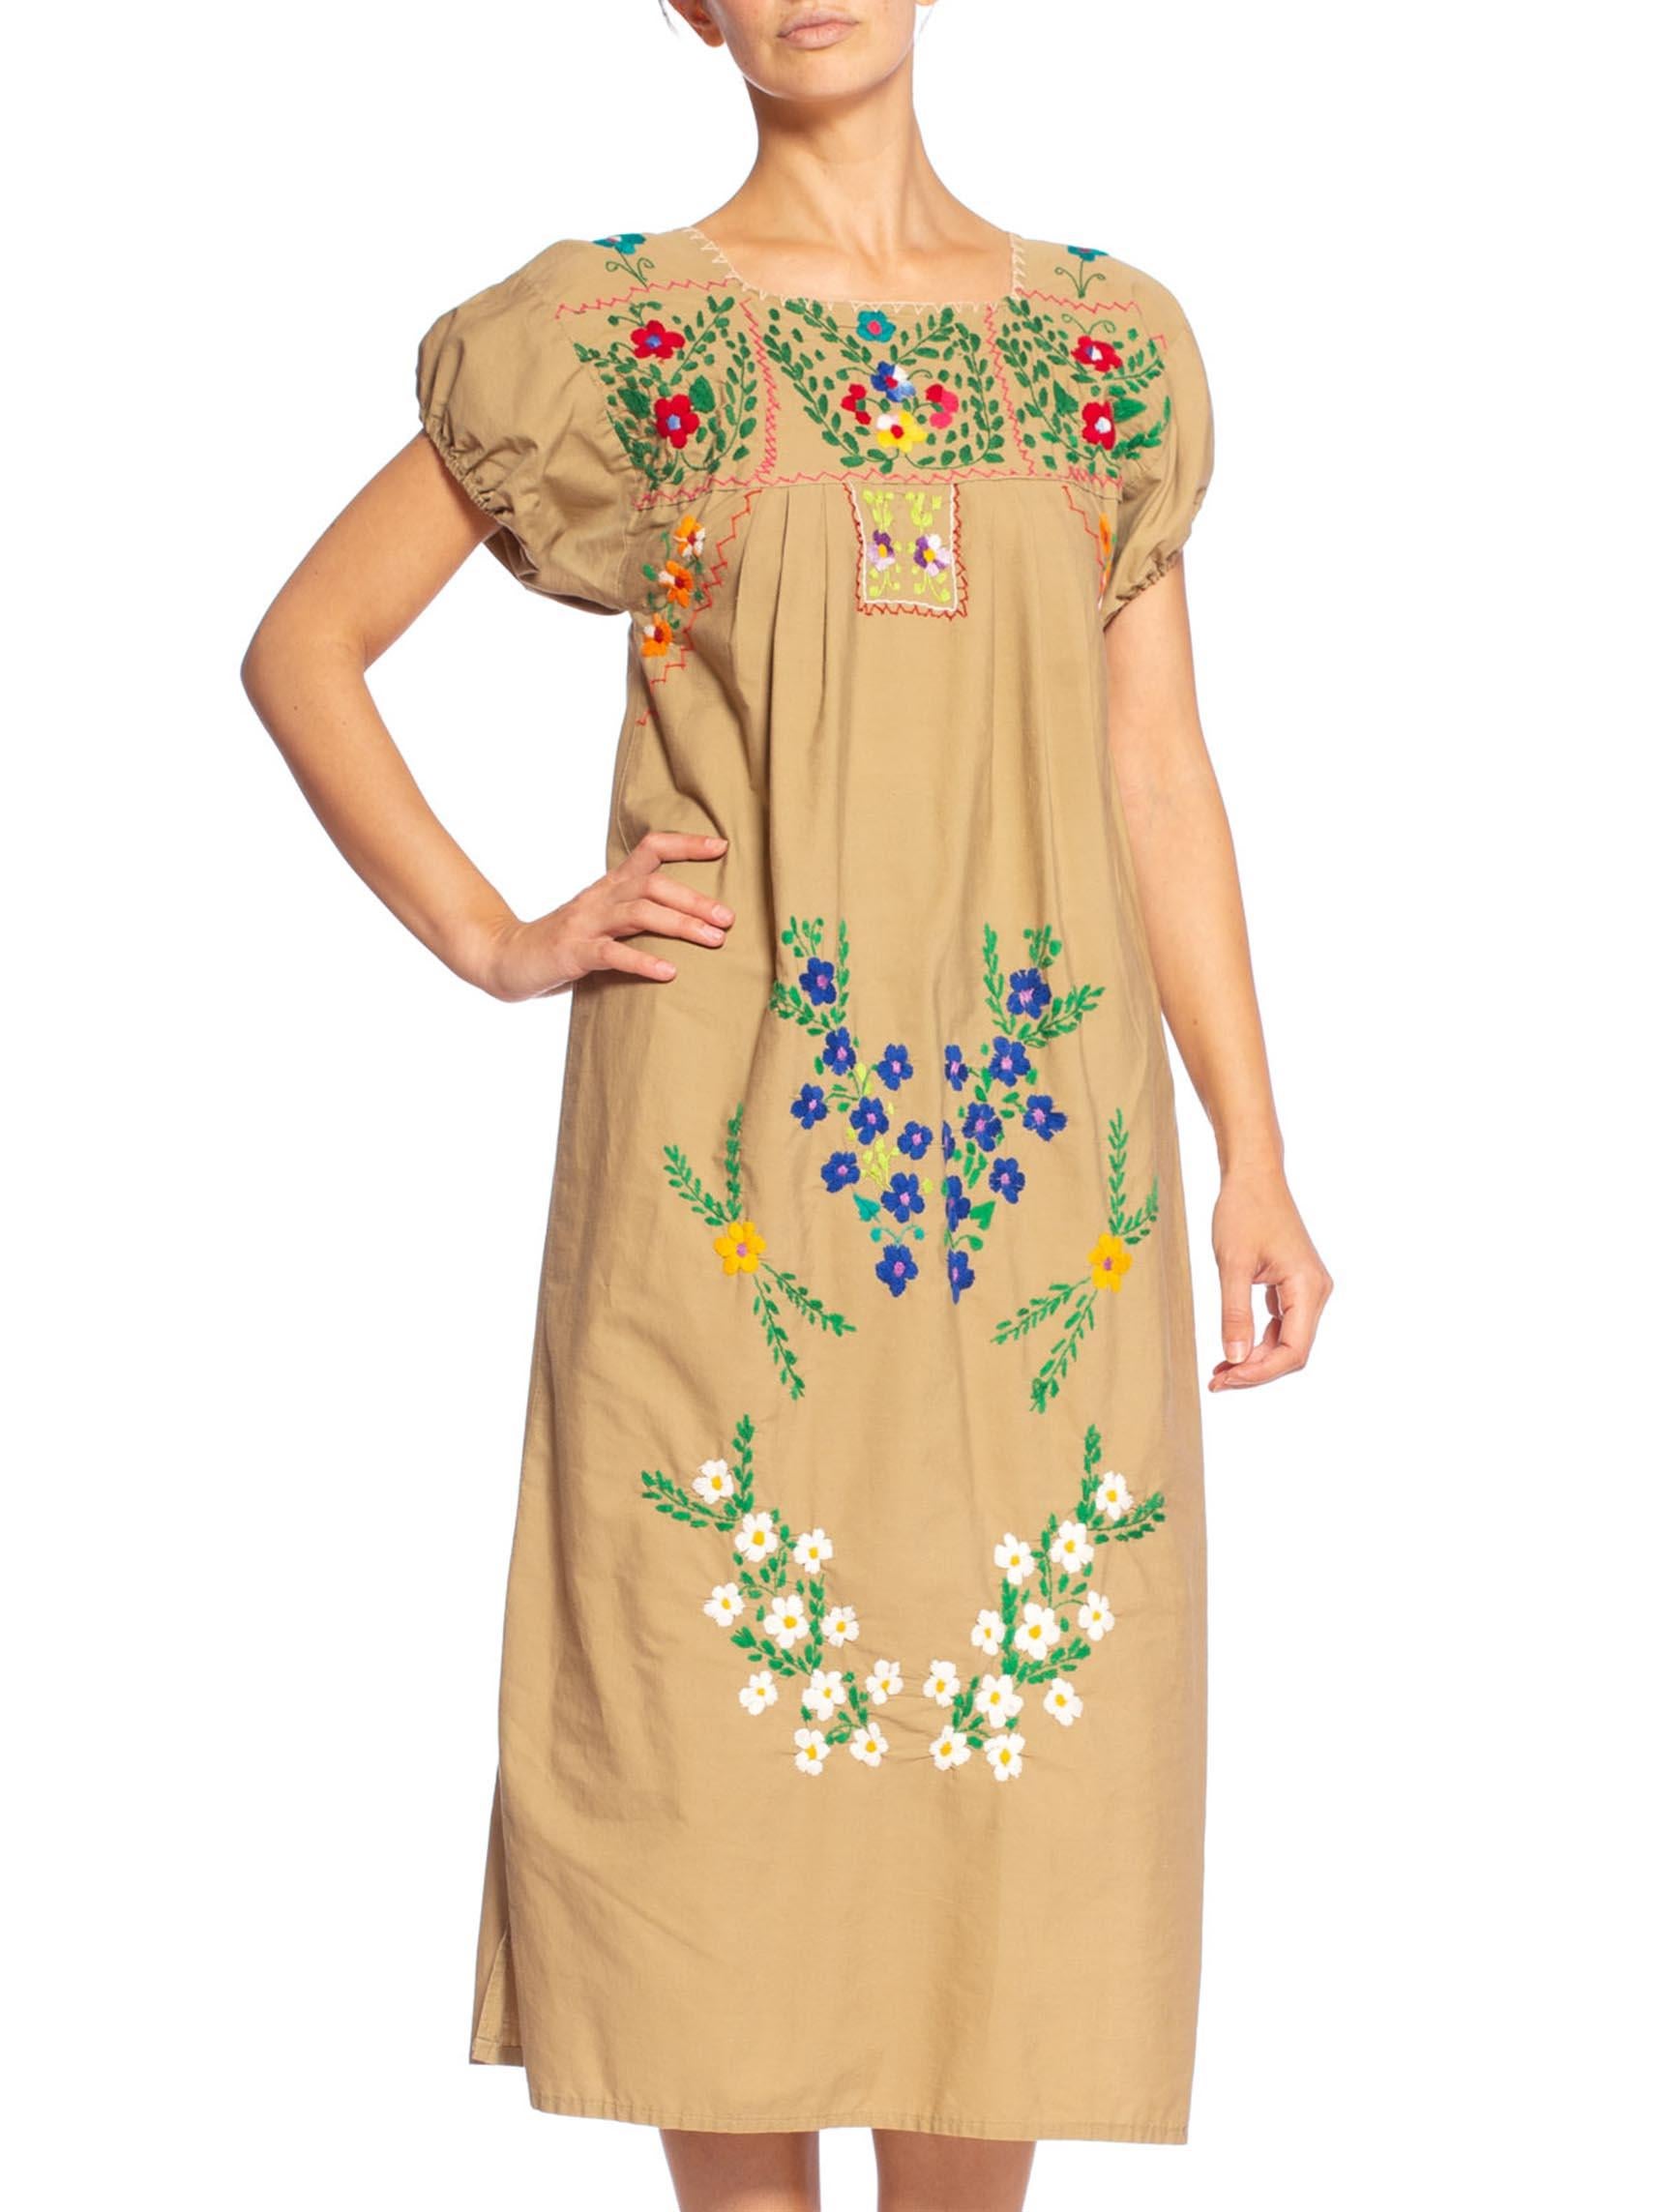 1970's Mexican Cotton Dress Covered In Hand Embroidered Flowers